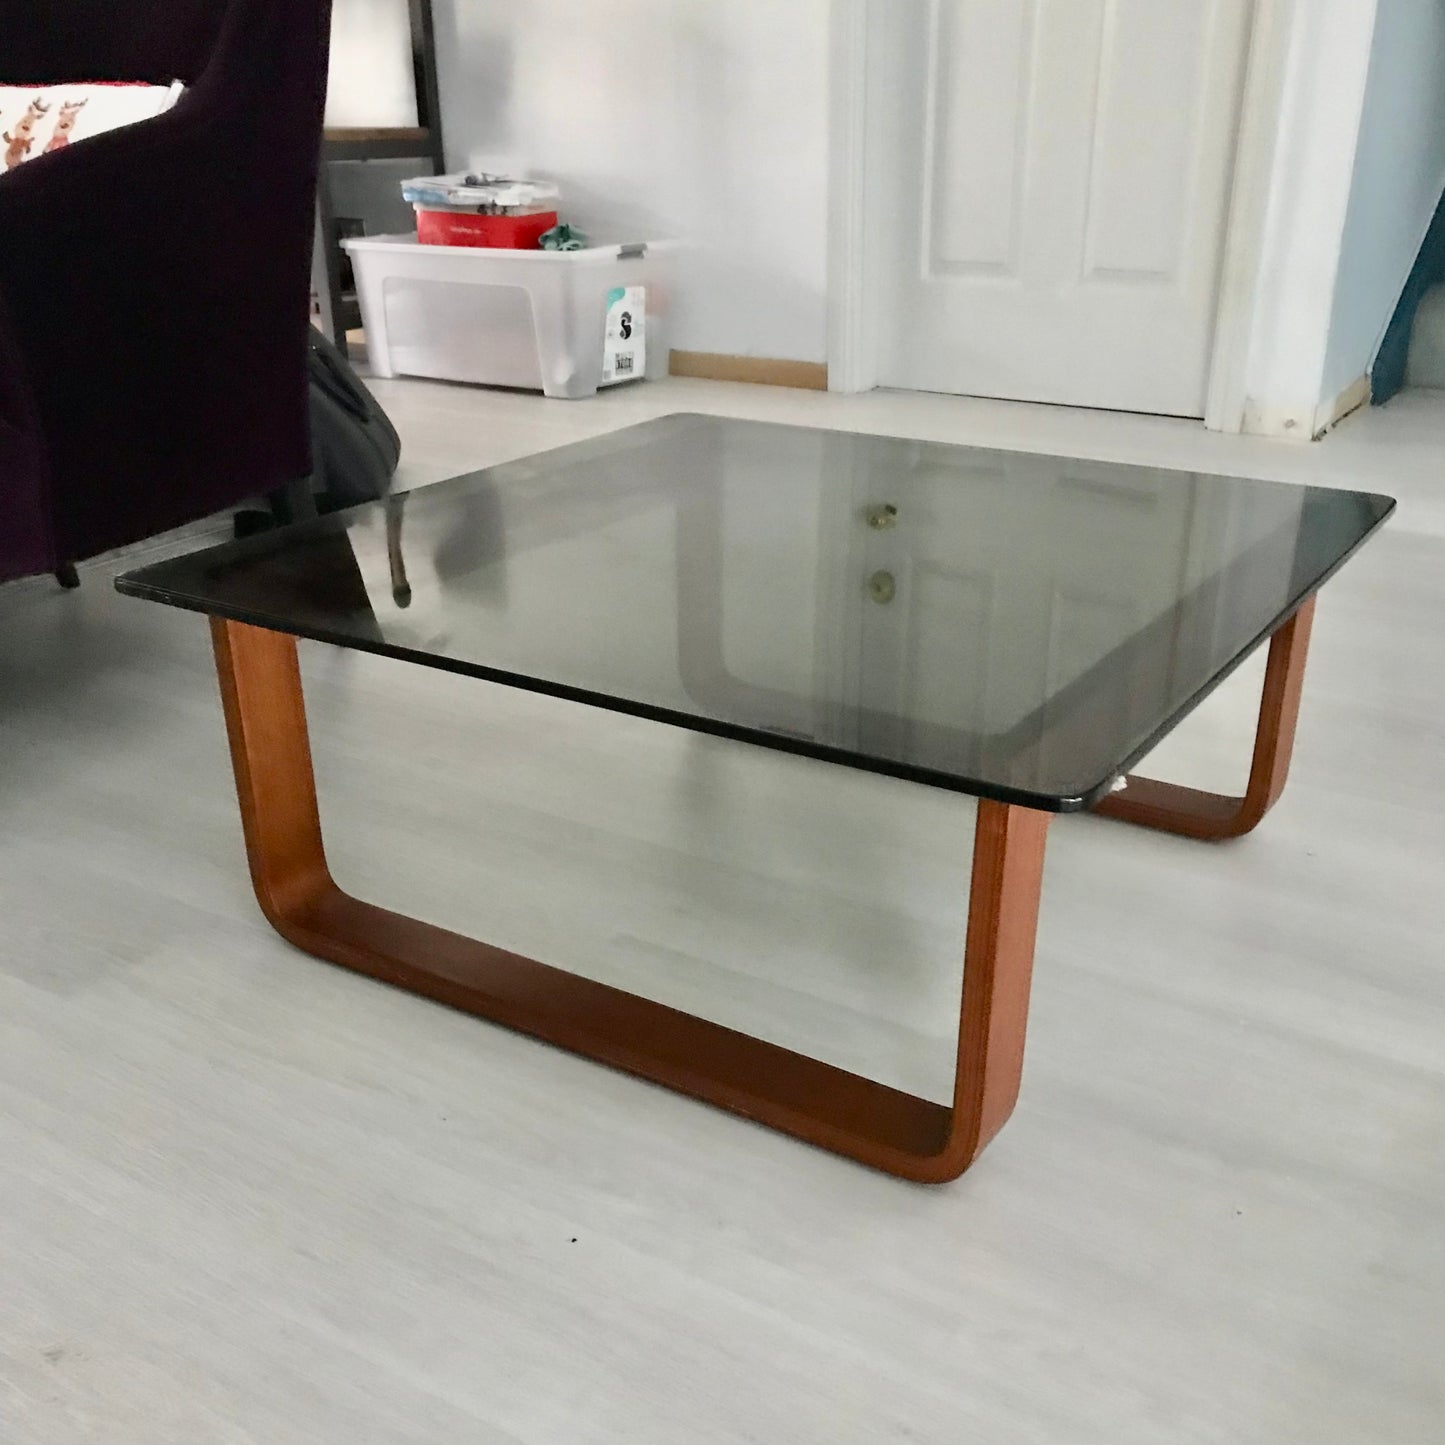 Vintage CT4 Square Coffee Table by Tessa Furniture